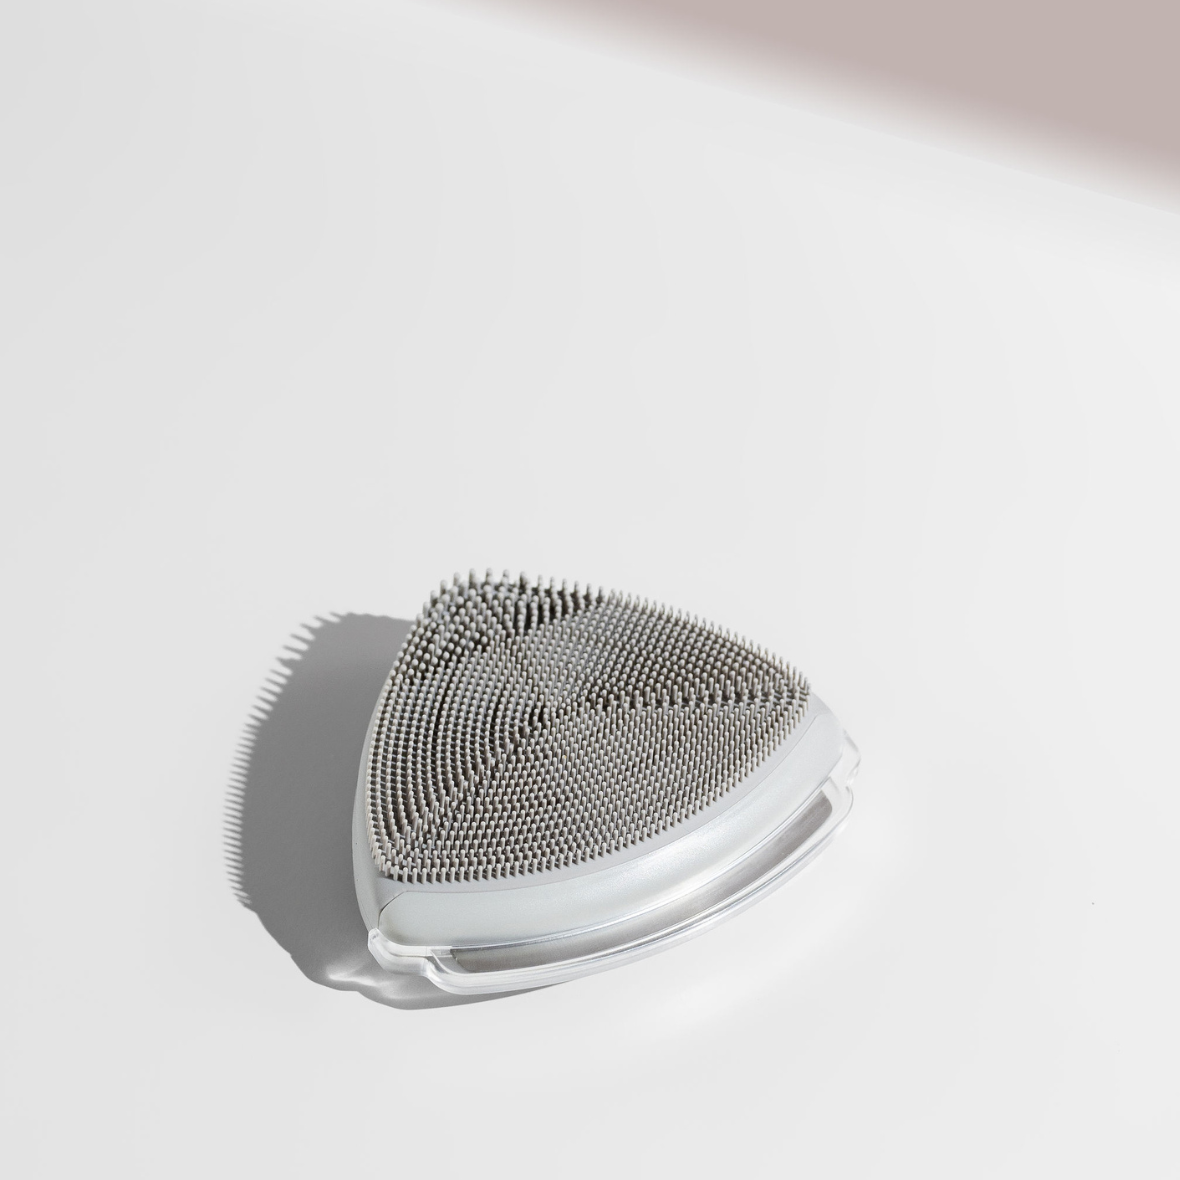 A triangular white and grey face exfoliator device on a white surface